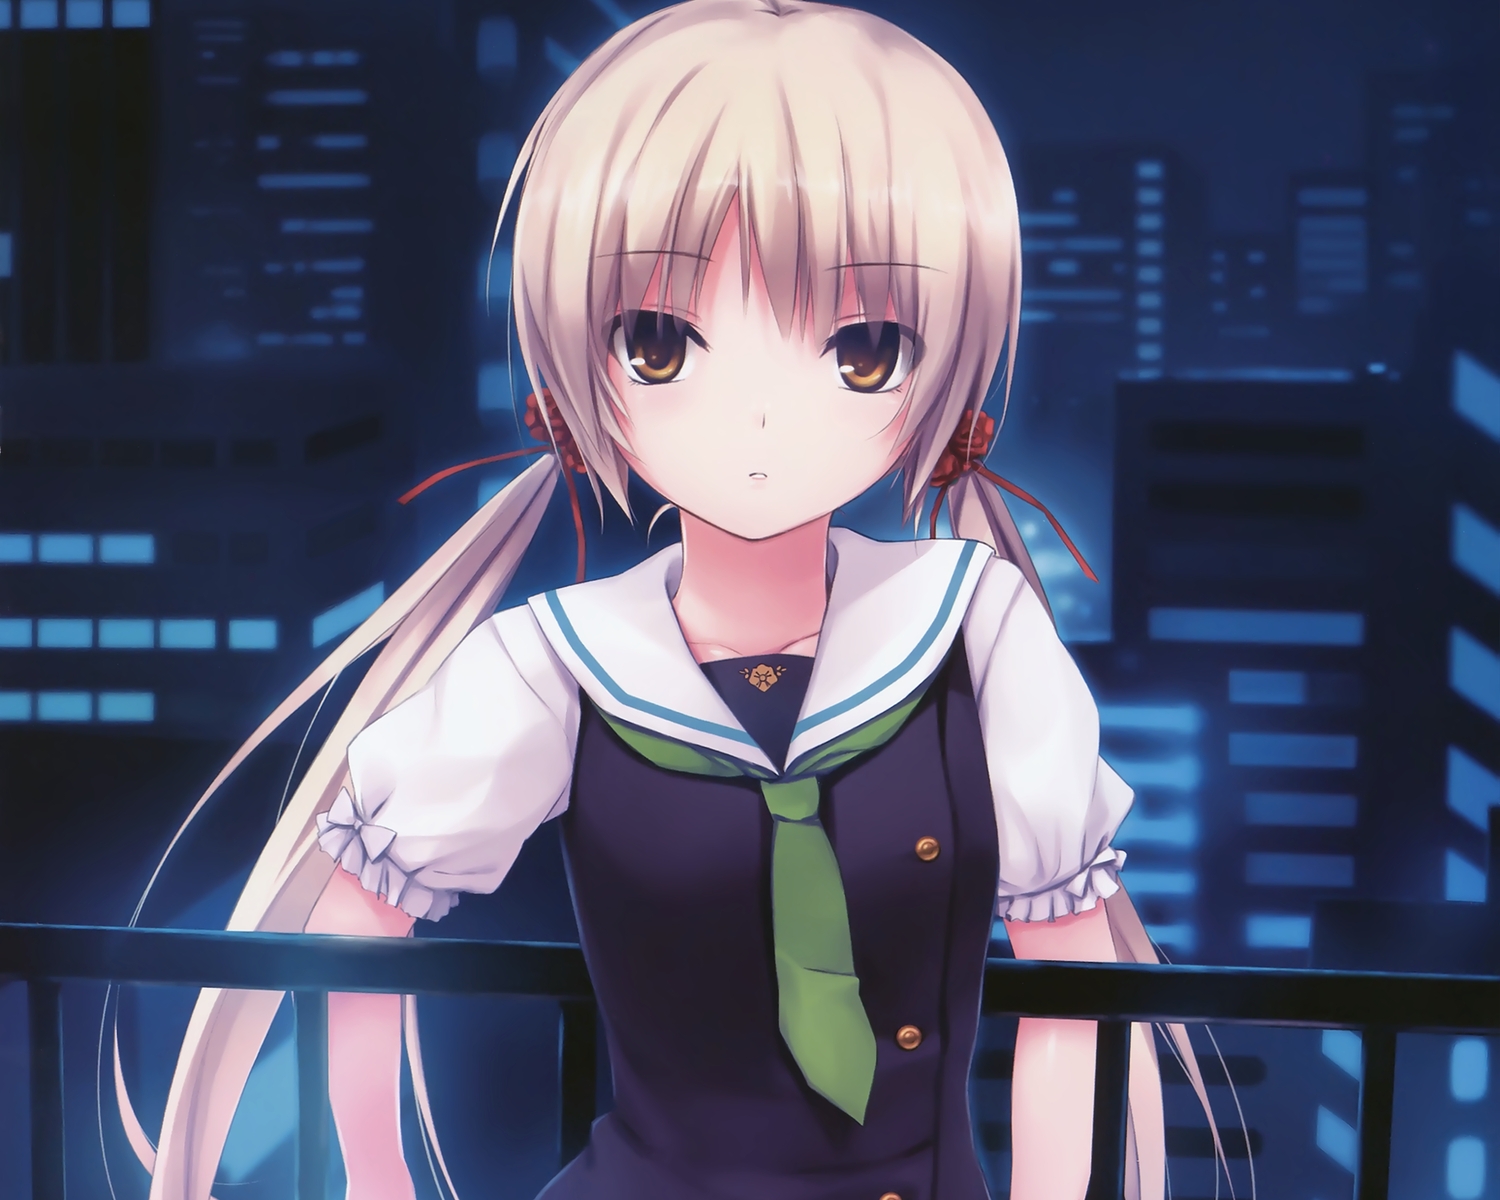 blonde, anime, city, evening, girl images